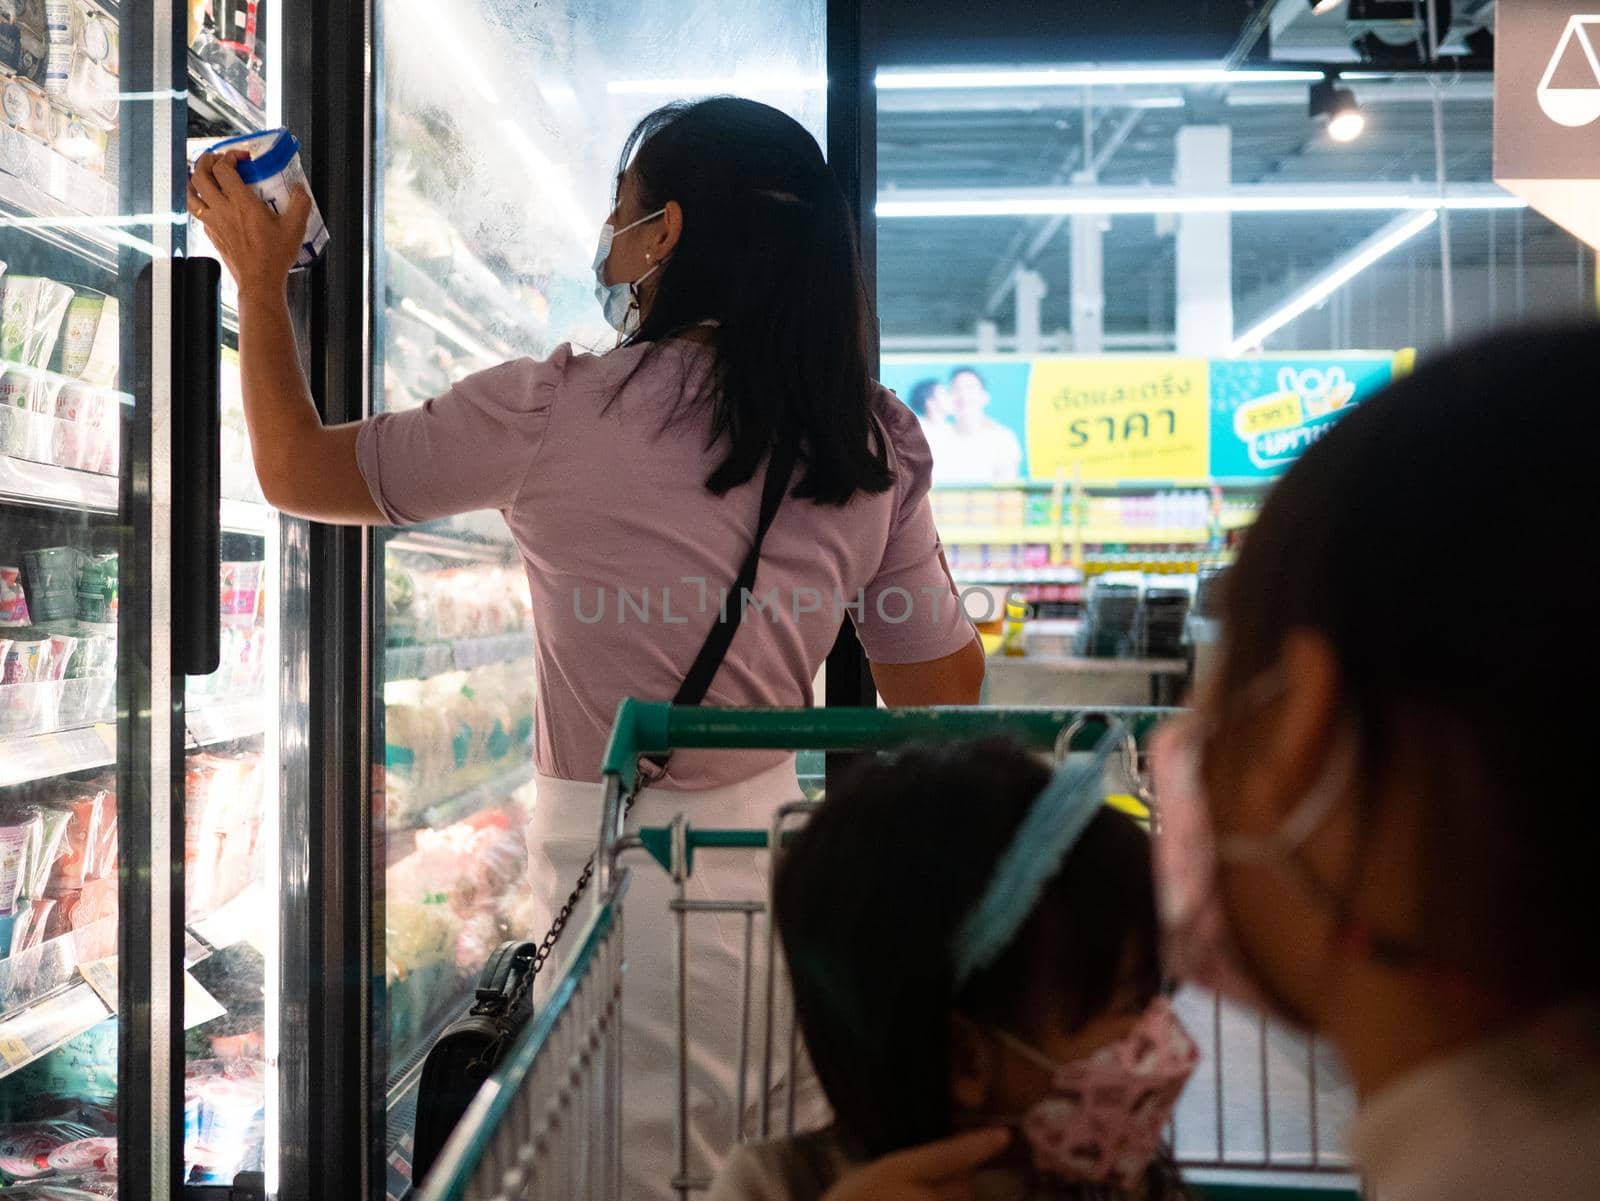 10 July 2021; Mother is choosing fresh dairy products or yogurt in the refrigerator  with her two young daughters sitting in a shopping cart in a supermarket in Chiang Mai. Shopping for healthy. by TEERASAK